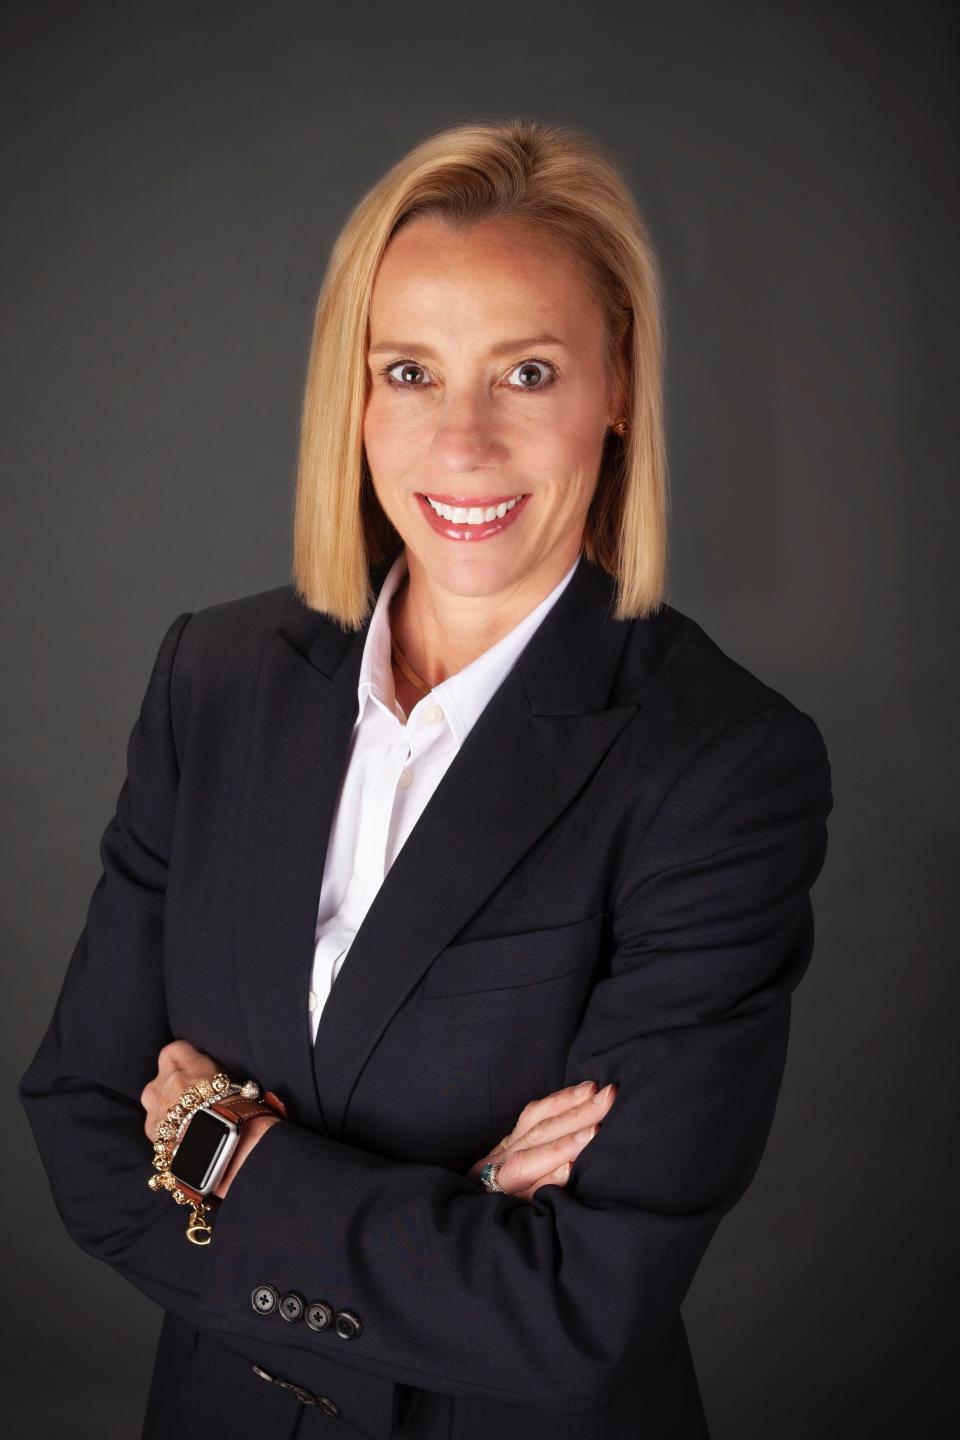 Cecilia Homison is the CEO of First Commerce Credit Union.